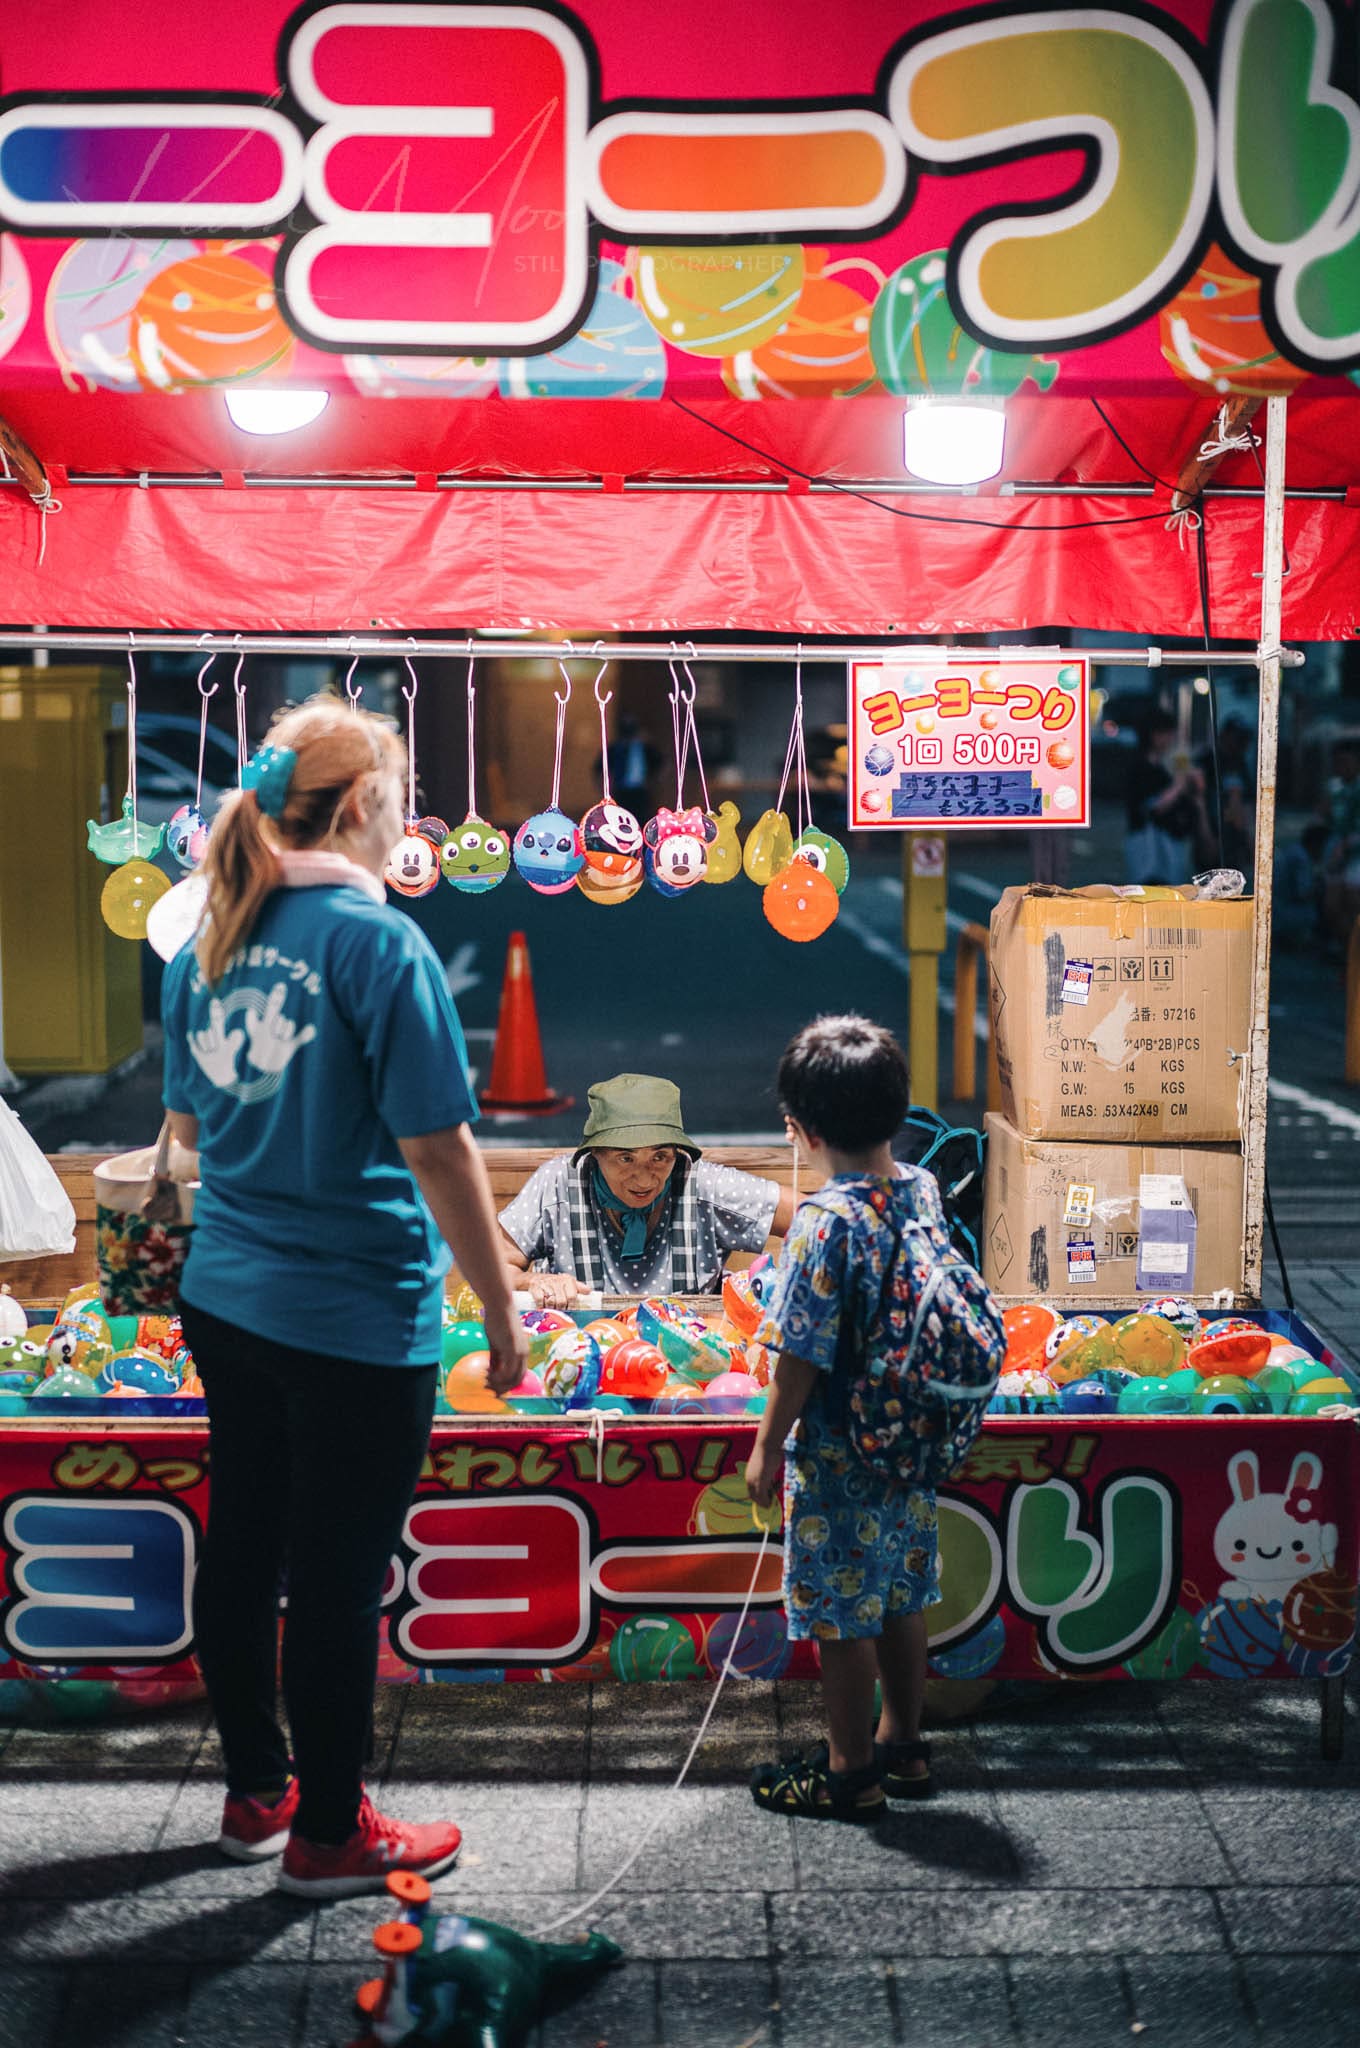 Adult and child exploring a vibrant toy stall at a bustling night festival.